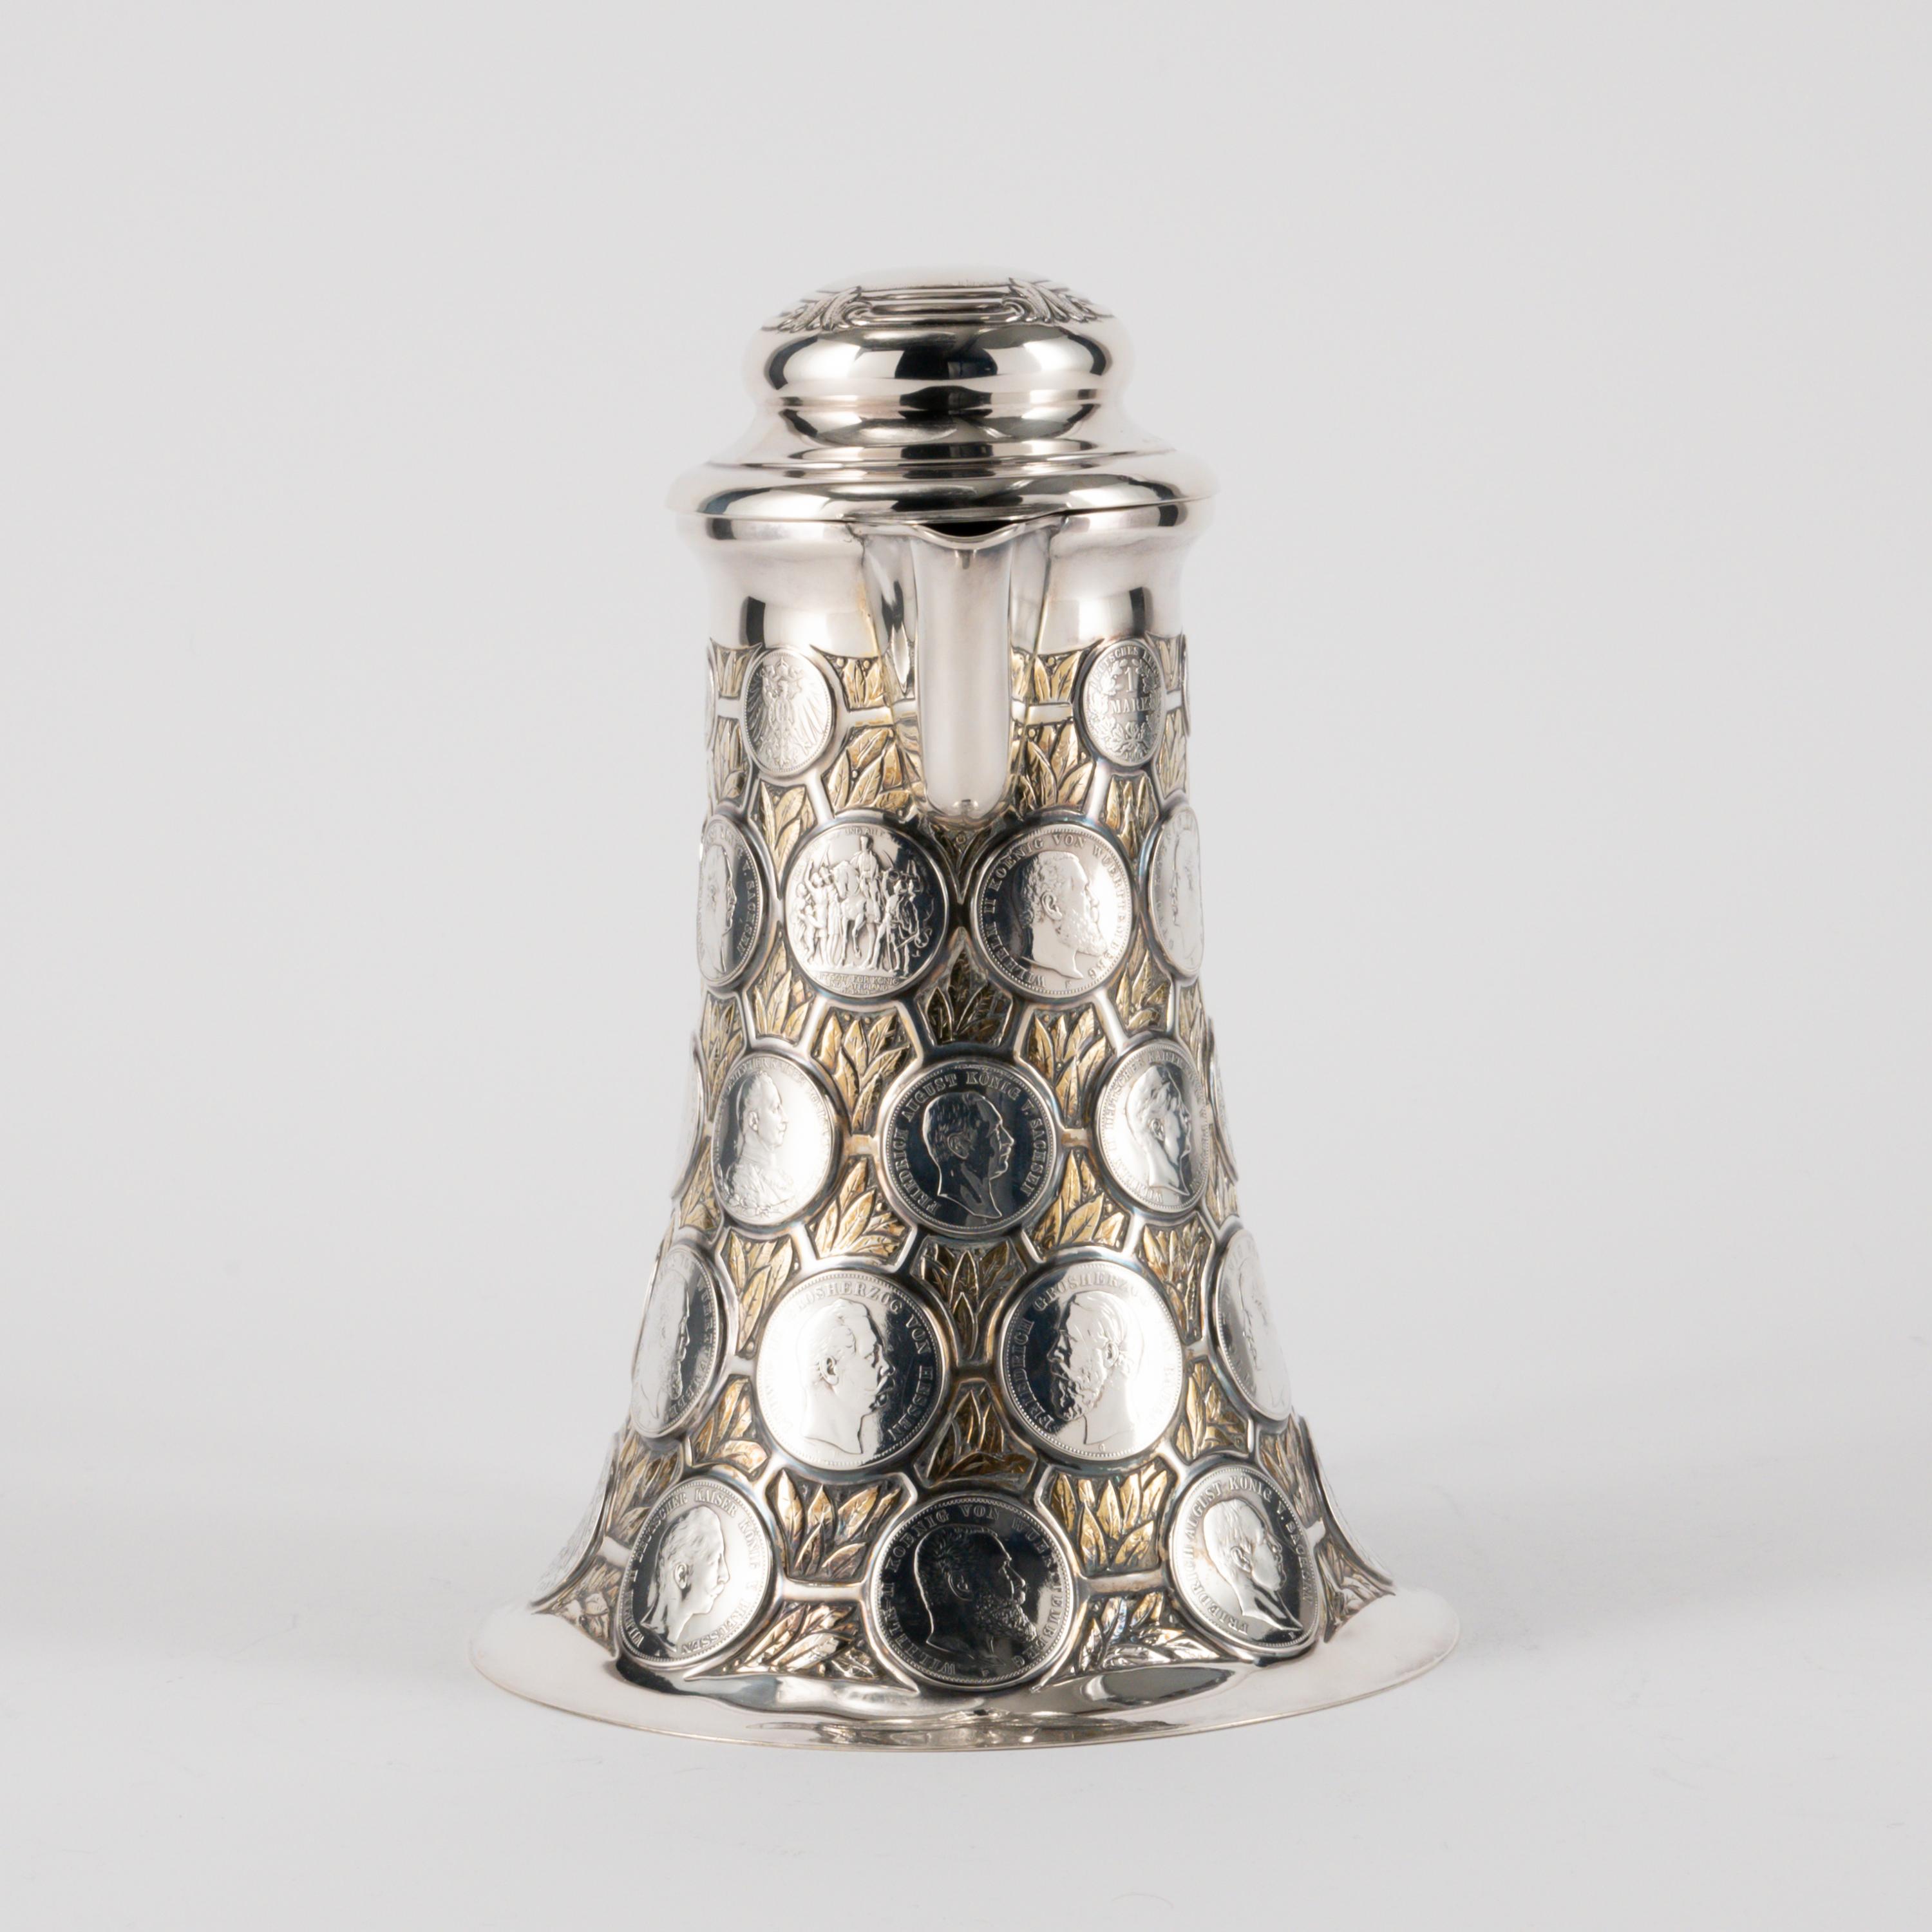 Magnificent Coin Tankard with Laurel Decor - Image 4 of 7